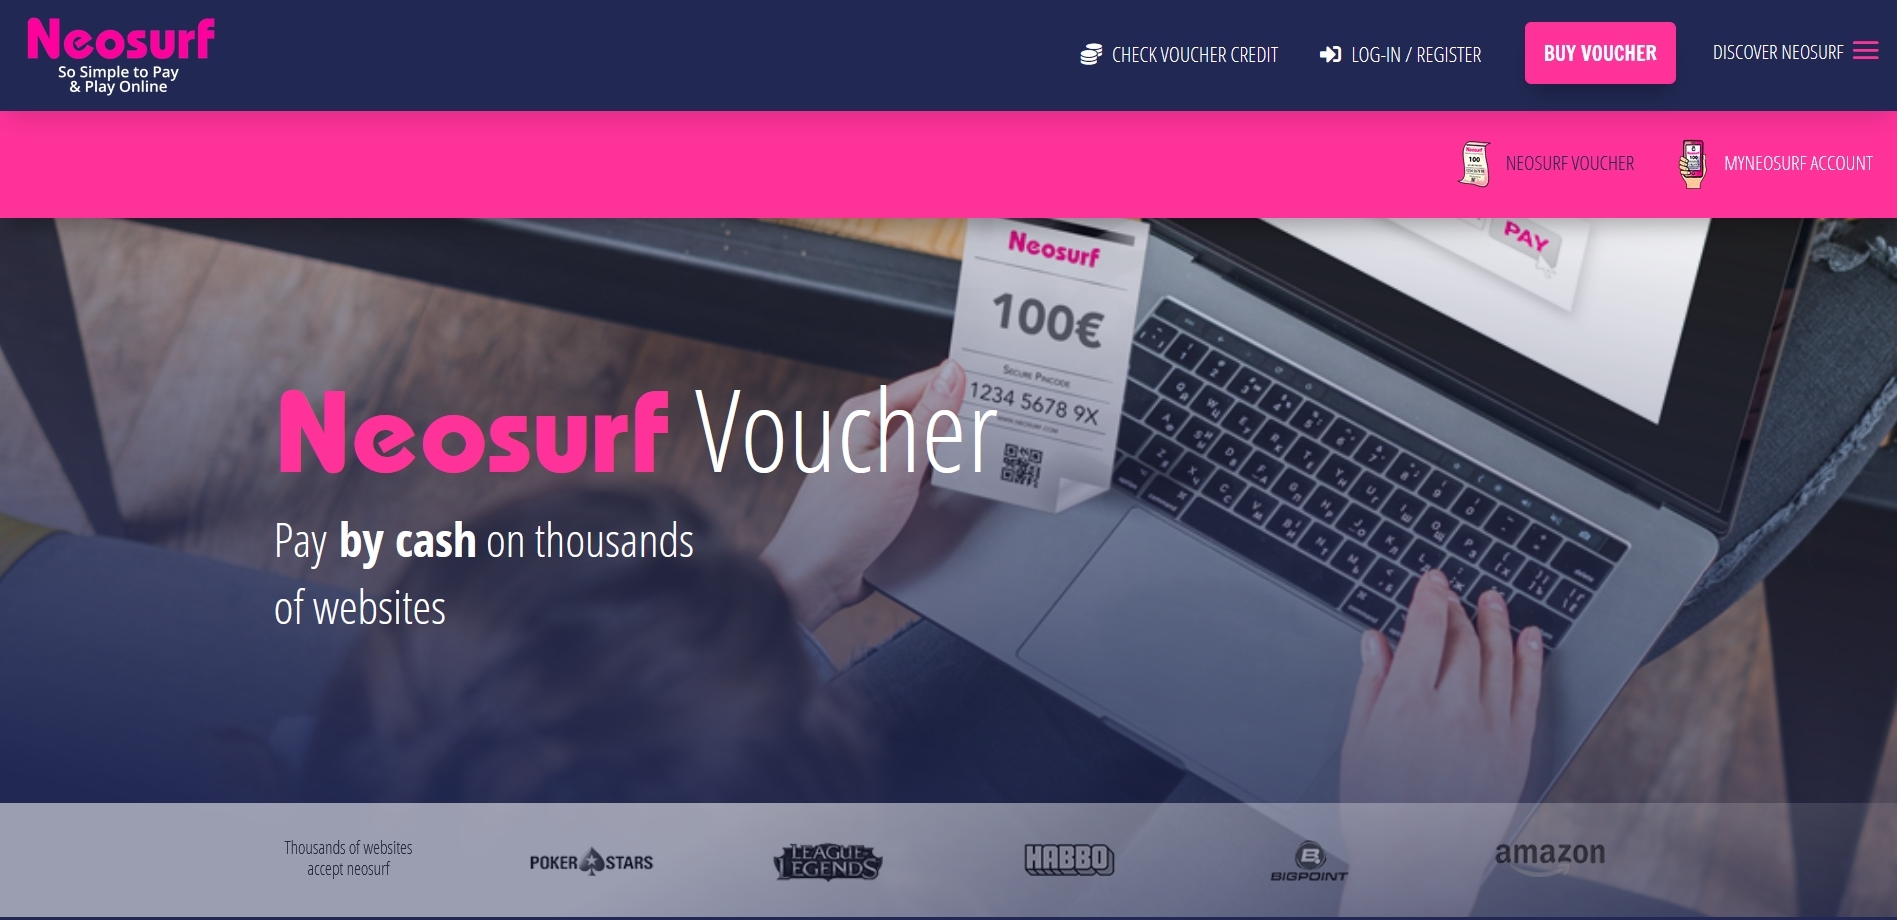 Neosurf €30 Gift Card BE $36.22